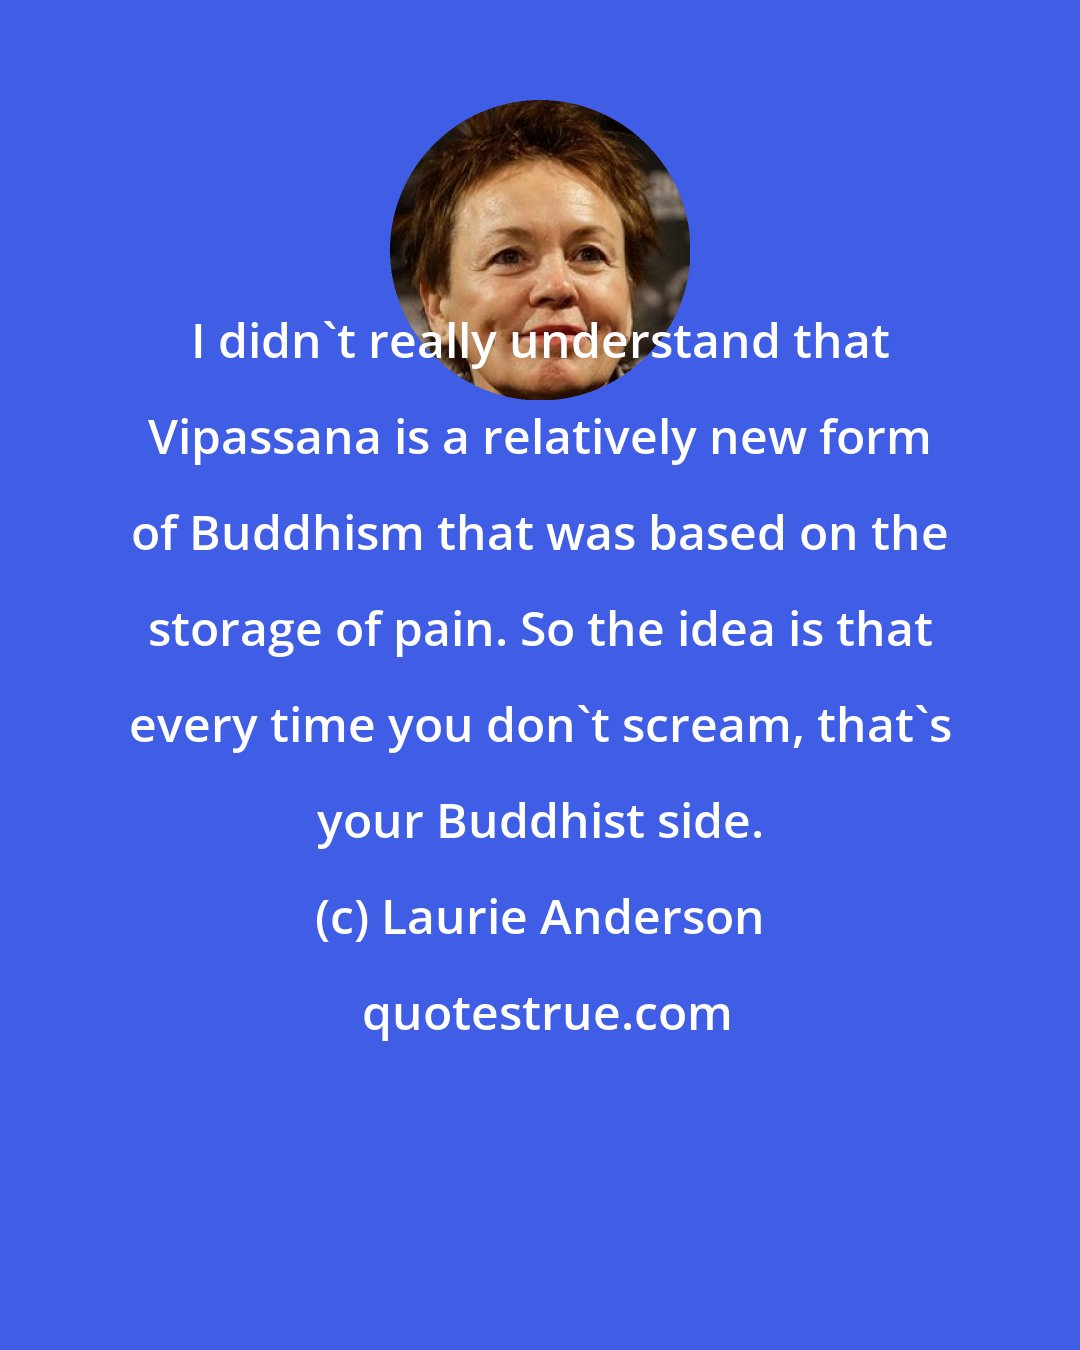 Laurie Anderson: I didn't really understand that Vipassana is a relatively new form of Buddhism that was based on the storage of pain. So the idea is that every time you don't scream, that's your Buddhist side.